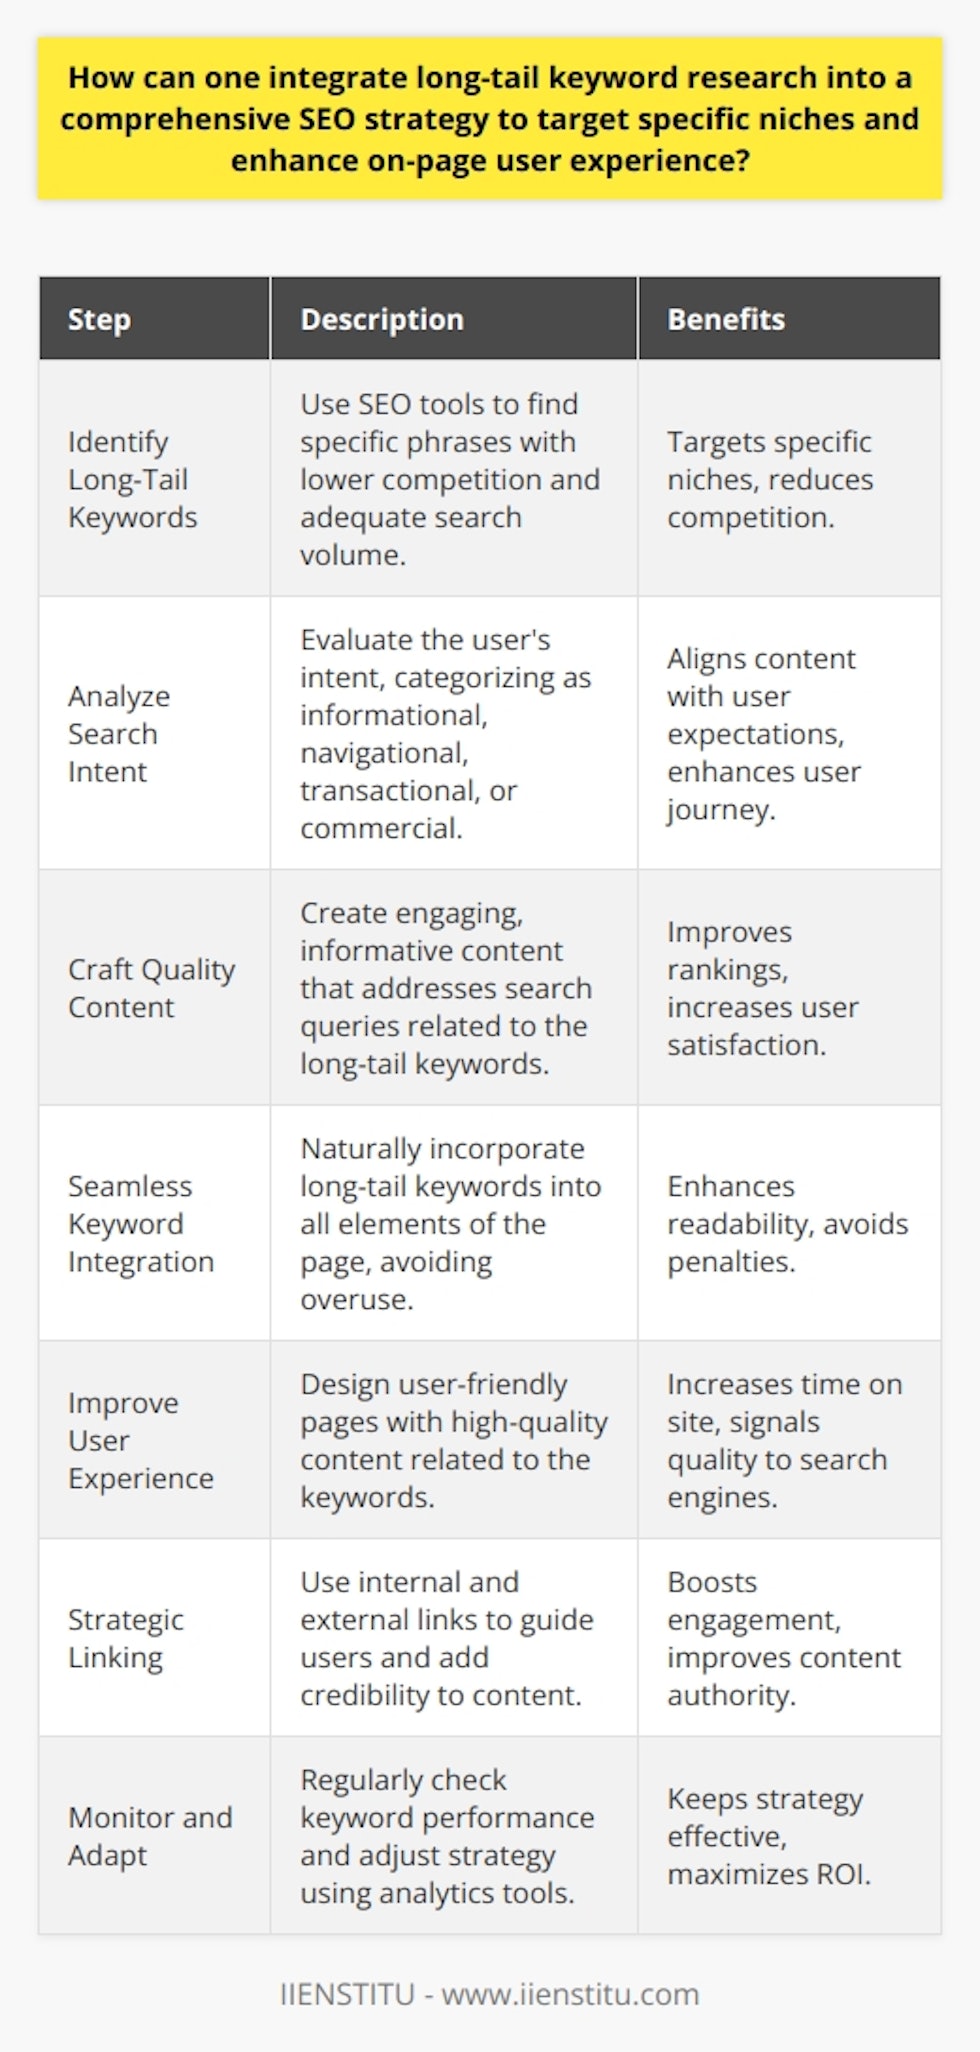 Integrating long-tail keyword research into a comprehensive SEO strategy can be highly effective in targeting specific niches while enhancing the on-page user experience. Below we outline how to employ long-tail keywords to maximize your SEO efforts:Identify Long-Tail Keywords:Start with identifying long-tail keywords that are pertinent to your niche. Use reputable SEO tools to discover phrases that are relevant to your core topic but have less competition than broader terms. Look for keywords that have adequate search volume but are not overwhelmed by large players in the industry.Analyze Search Intent:To leverage long-tail keywords, you must understand the searcher's intent. Long-tail phrases often indicate a more detailed query, suggesting that the user is further along the buyer's journey. Analyze whether the intent is informational, navigational, transactional, or commercial to tailor your content accordingly.Craft Quality Content:Create content that addresses the needs and questions implicit in the long-tail keyword. Quality content that satisfies the searcher's intent is more likely to rank higher and provide a better user experience. Use the long-tail phrases to guide the structure and focus of the content, ensuring that it is engaging and informative.Seamless Keyword Integration:Place the long-tail keywords in your content naturally. They should fit neatly into titles, headings, meta descriptions, image alt tags, and within the text. Keyword stuffing should be avoided as it can result in penalties from search engines and deter readers. Instead, aim for a natural flow that keeps the reader engaged.Improve User Experience:Ensure that the page is user-friendly and provides value beyond just incorporating keywords. A well-designed page with high-quality, supportive content can encourage visitors to spend more time on your site, which can signal to search engines that your site is providing a good user experience.Strategic Linking:Incorporate both internal and external links within your content. Internal links guide users to other areas of your site, increasing the chances of engagement with additional content. External links to authoritative sources can add credibility to your content and are often appreciated by search engines as indicators of the quality and relevancy of your website.Monitor and Adapt:SEO is not a set-it-and-forget-it process. Monitor the performance of your long-tail keywords and make adjustments as necessary. Tools like Google Analytics can help track which keywords are driving traffic and conversions, and which may need to be revised or replaced.By following these steps, you can effectively integrate long-tail keyword research into your SEO strategy, targeting specific audiences more efficiently and improving the user experience on your website. It's critical to remember that the goal is not just to attract traffic, but to draw in the right kind of traffic that will engage with your content, find value in your offerings, and ultimately, convert.